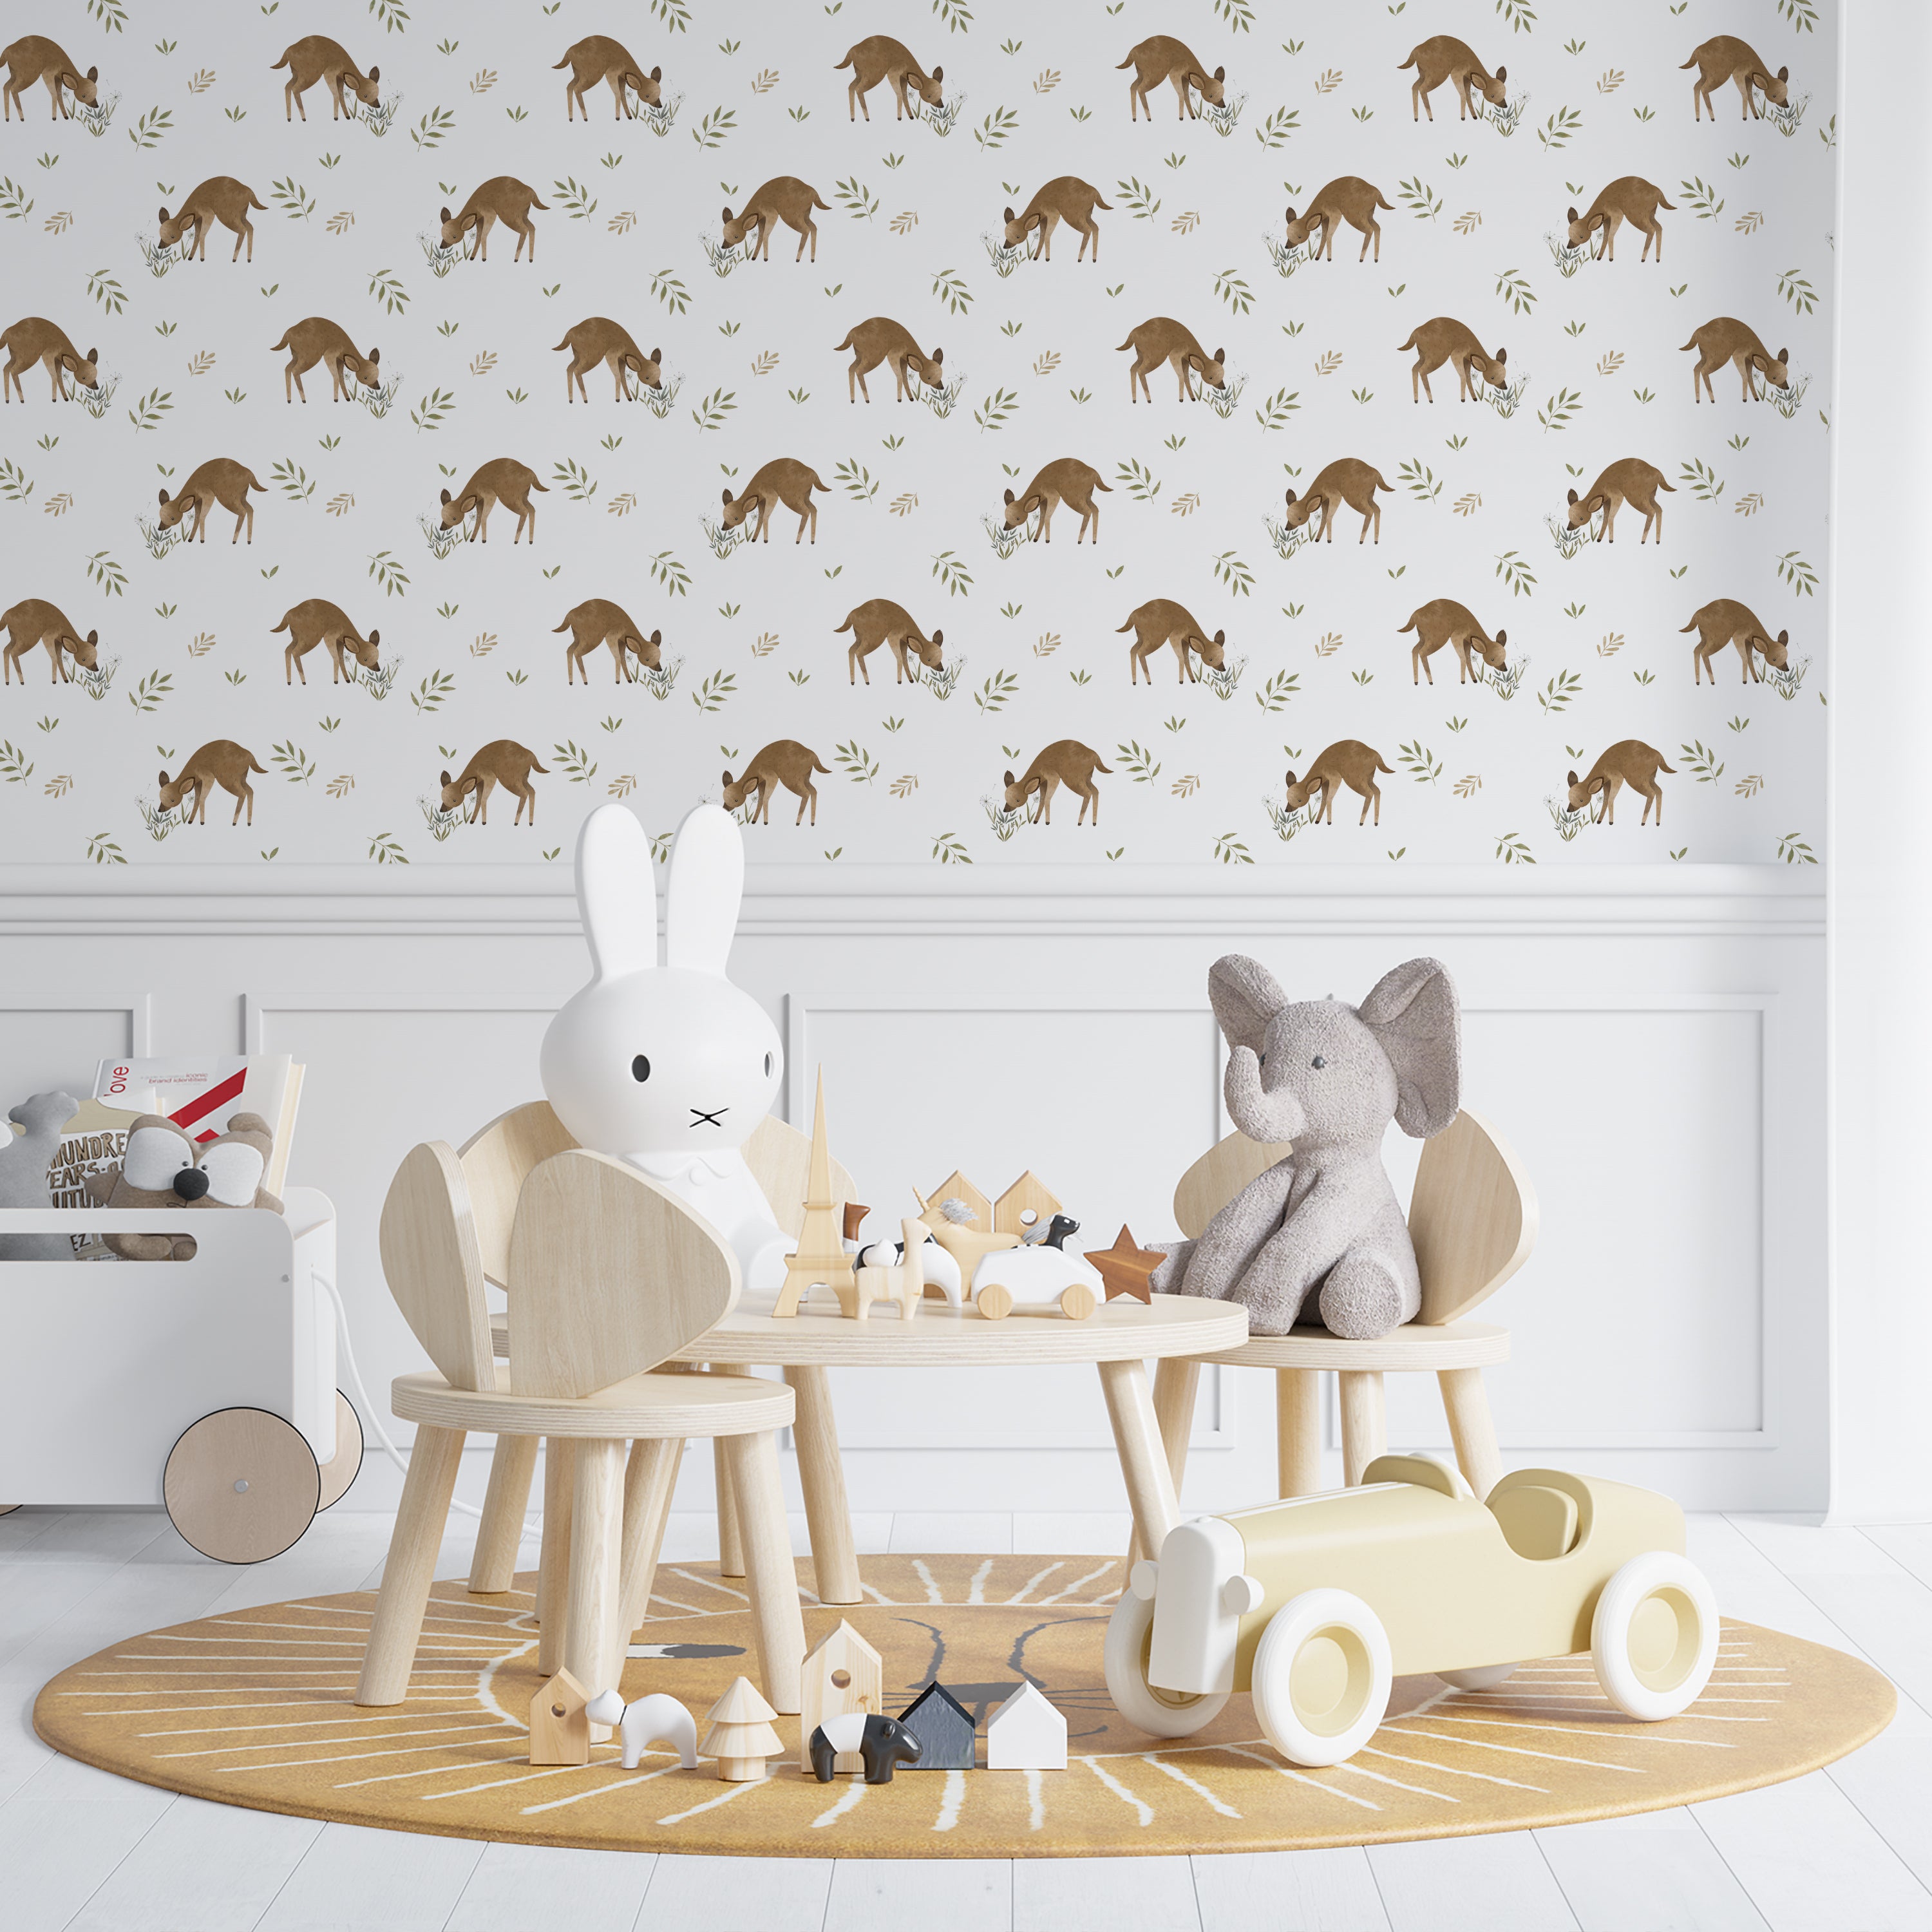 A cozy children's room decorated with Forest Fawn Wallpaper, enhancing the playful yet tranquil atmosphere. The gentle pattern of fawns, flowers, and leaves provides a naturalistic backdrop ideal for nurturing environments